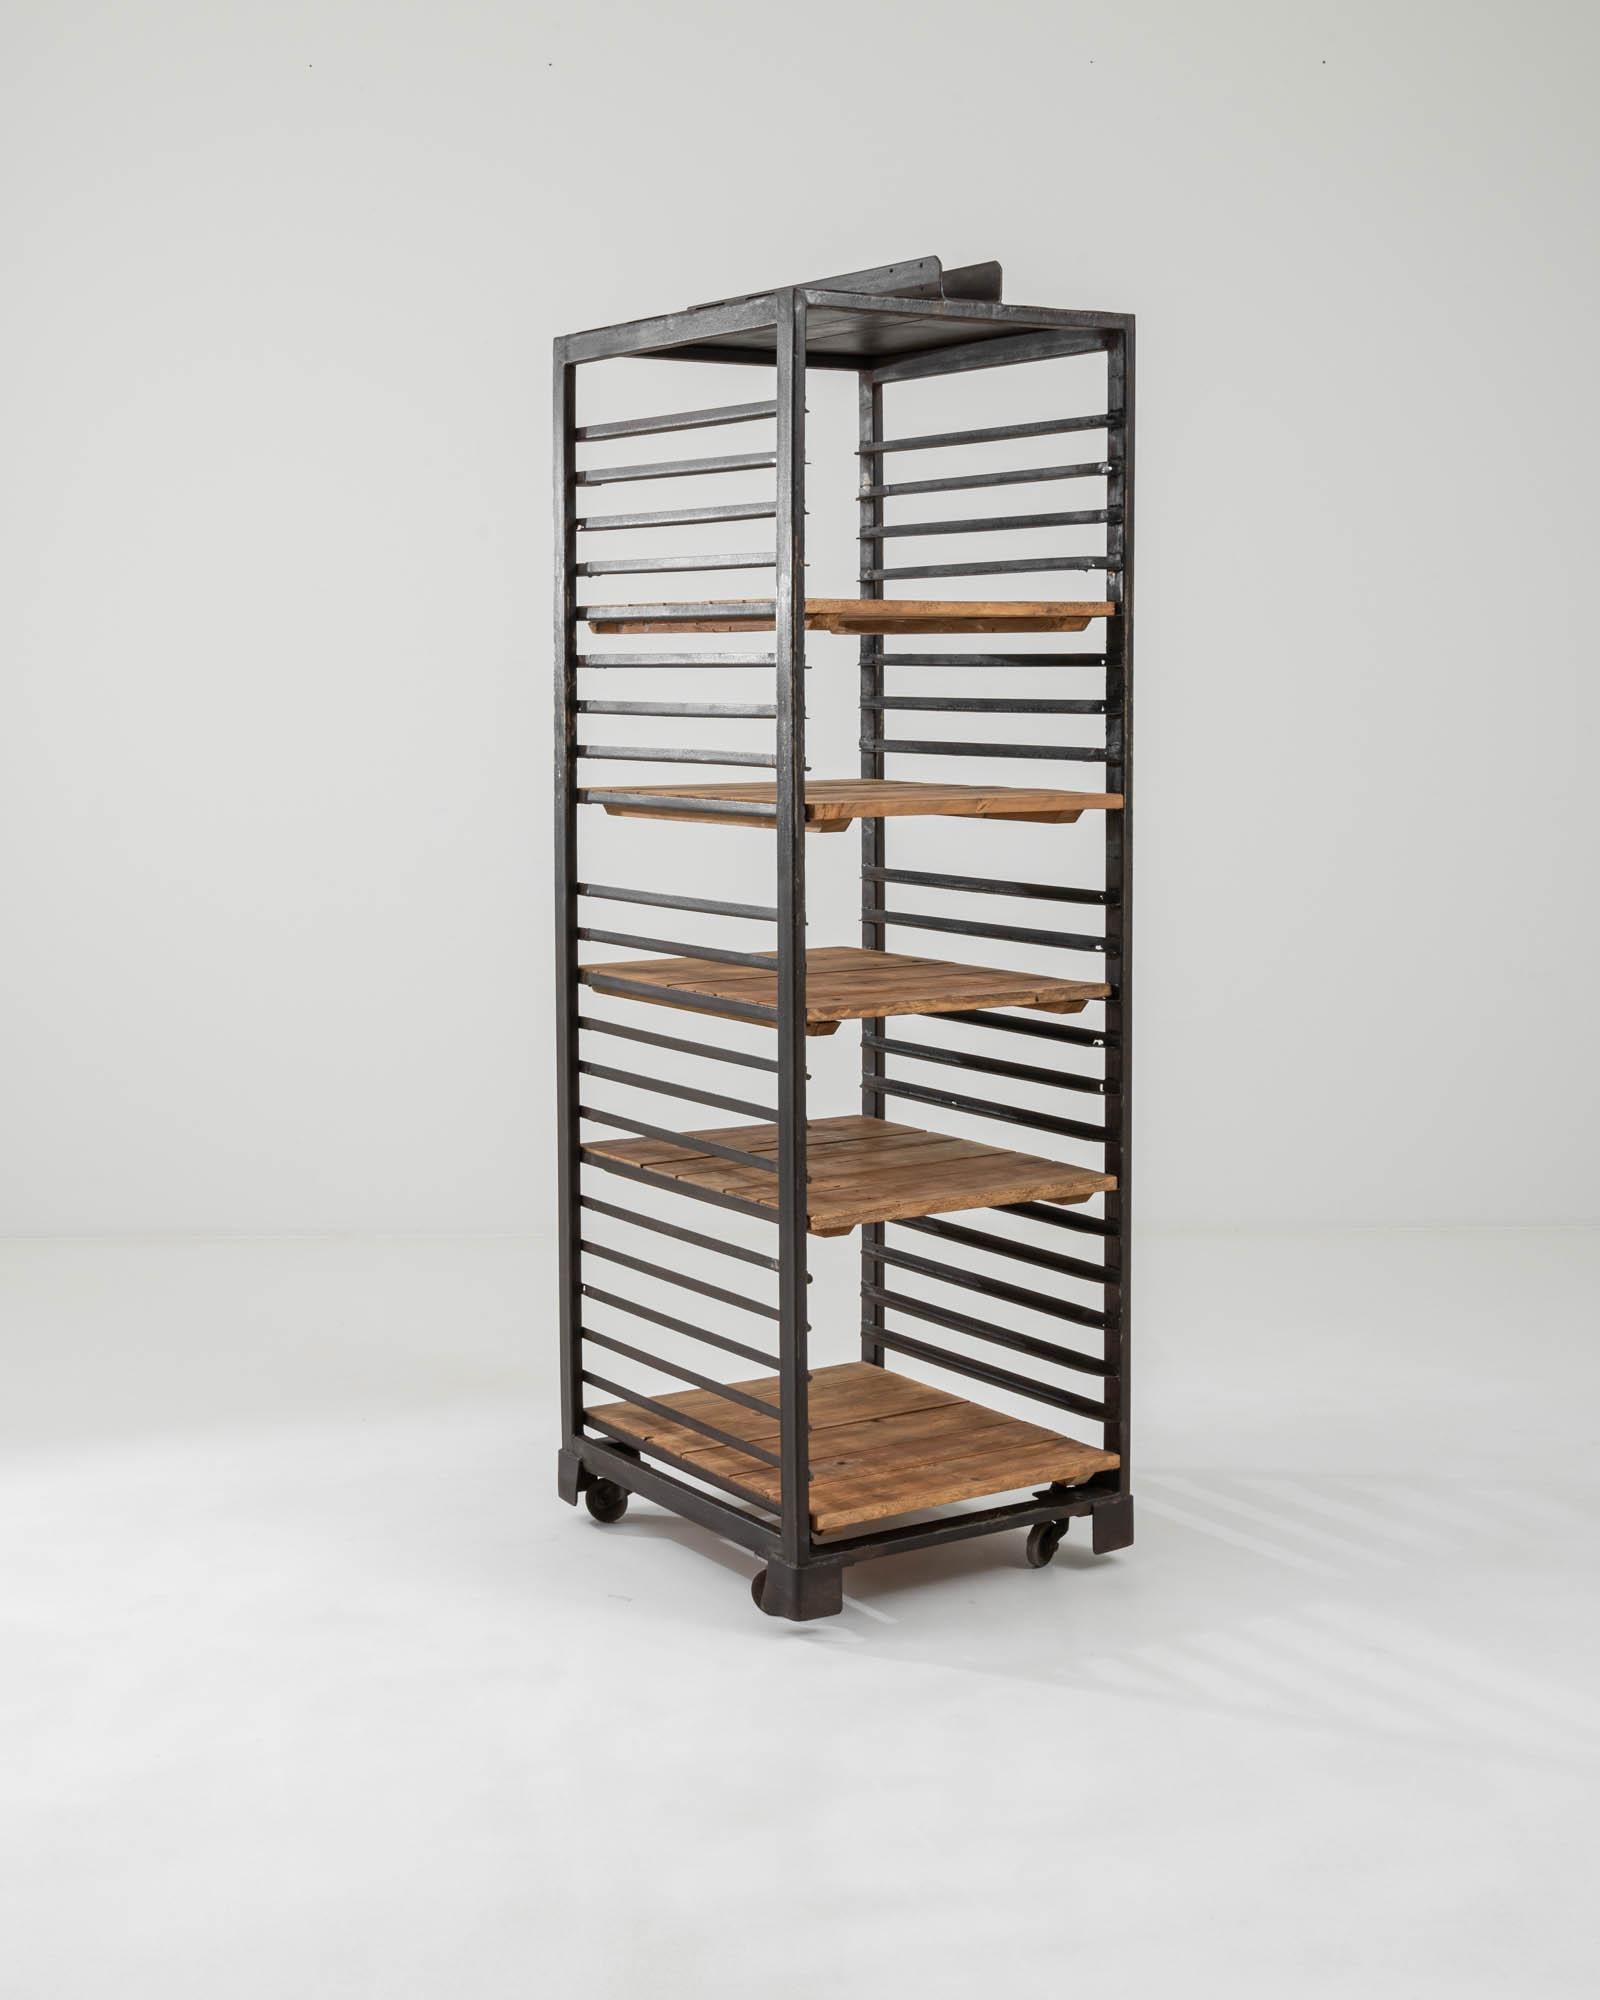 A metal and wooden set of shelves created in 20th century France. With both an industrial and homey quality, this delightful set of shelves projects a sense of both forthright purpose and a cozy warmth. Created entirely from steel and slats of